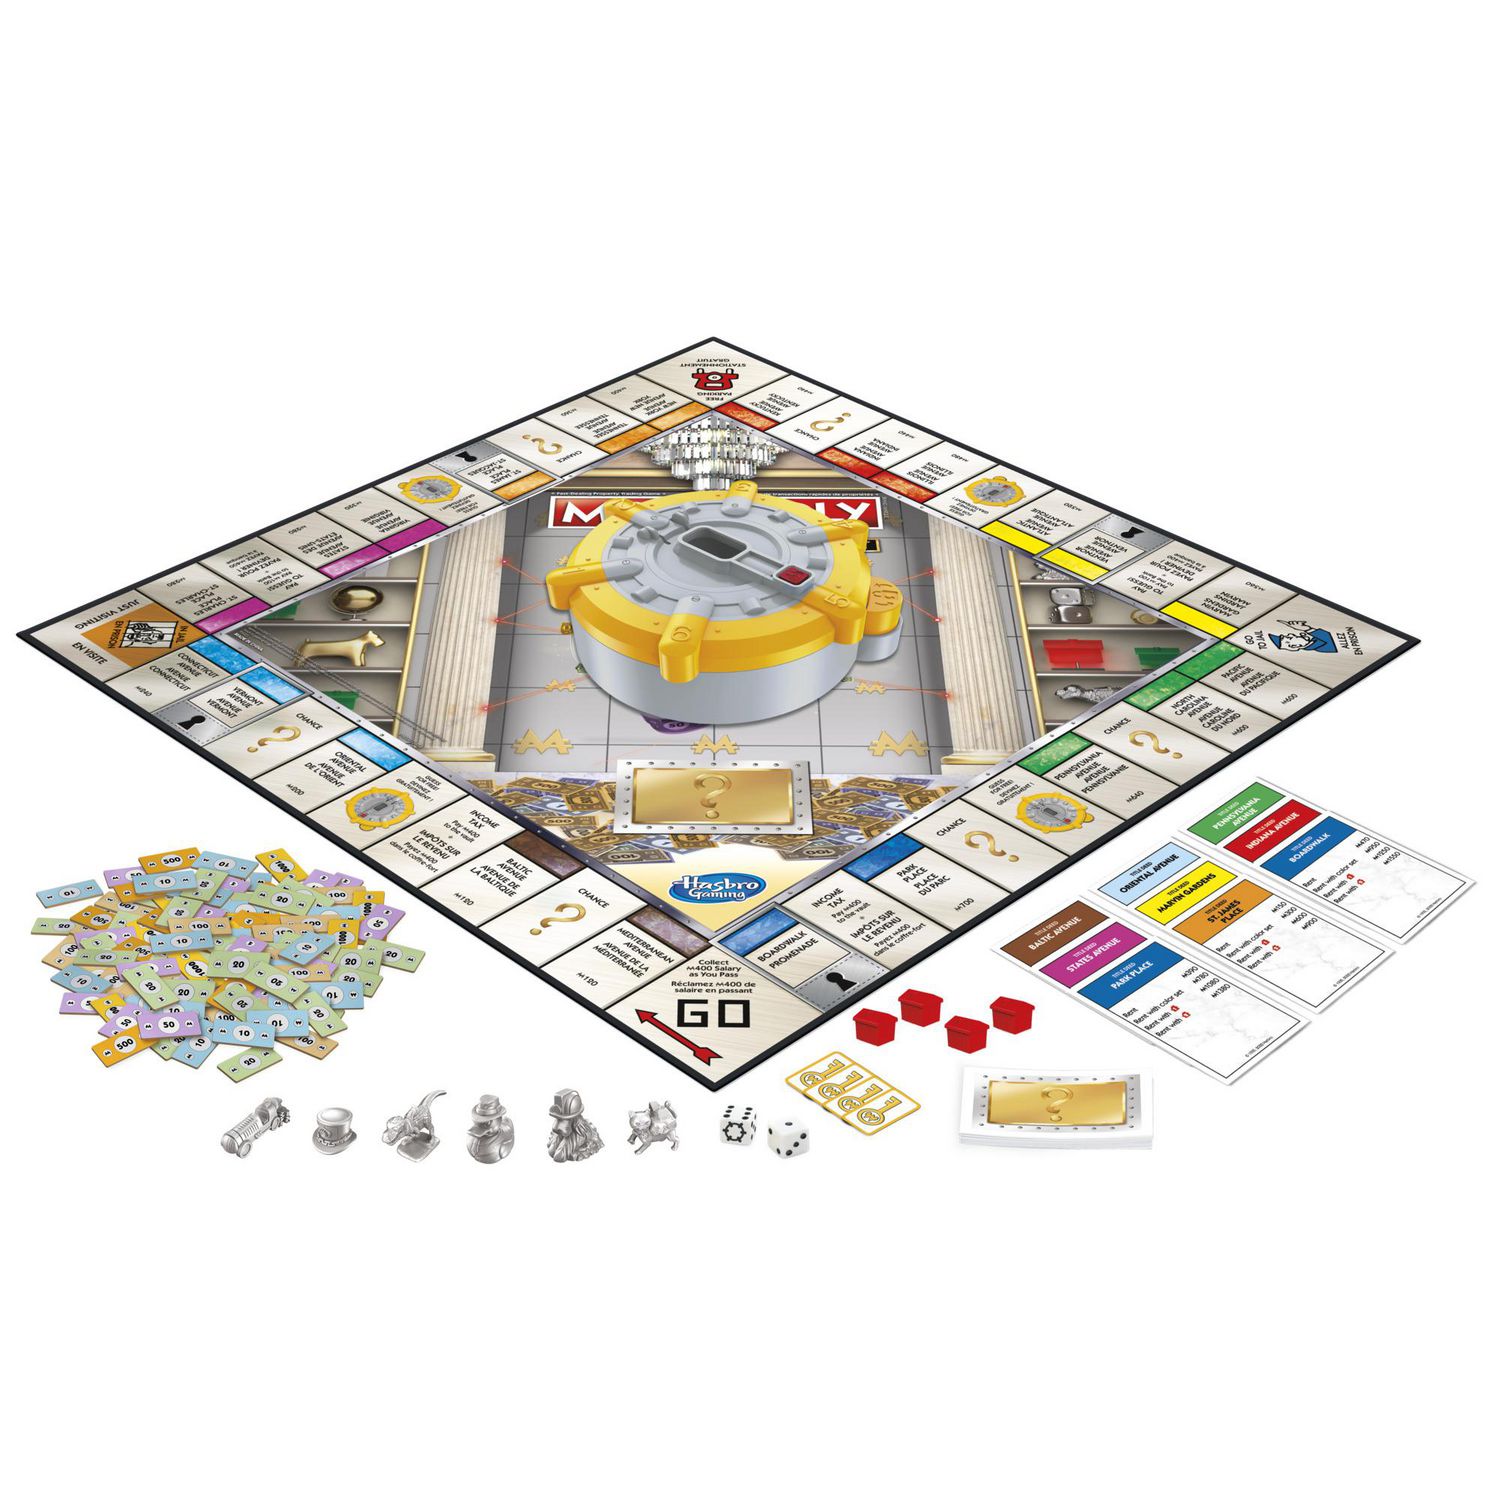 Monopoly Secret Vault Board Game for Kids Ages 8 and Up, Family